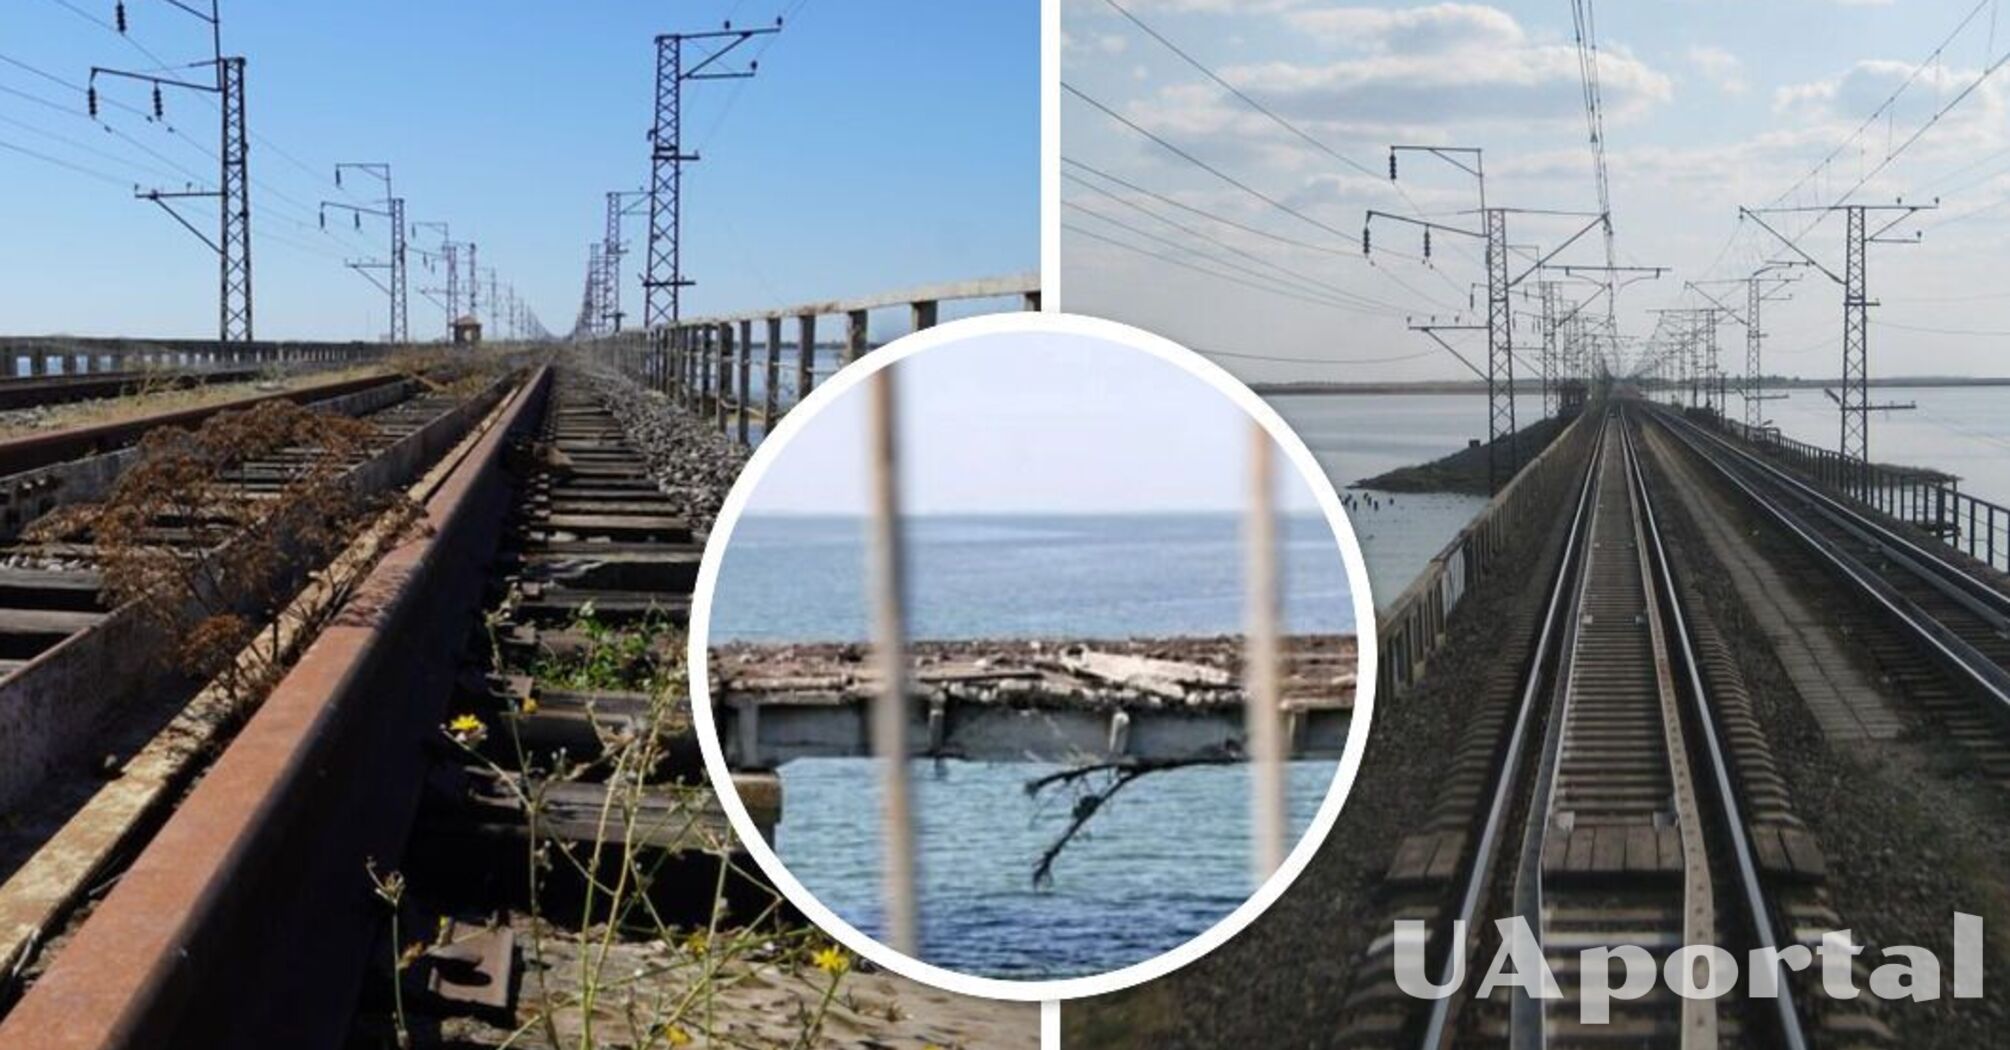 Ukrainian Armed Forces strike at Chongar railway bridge used by Russians to transport weapons